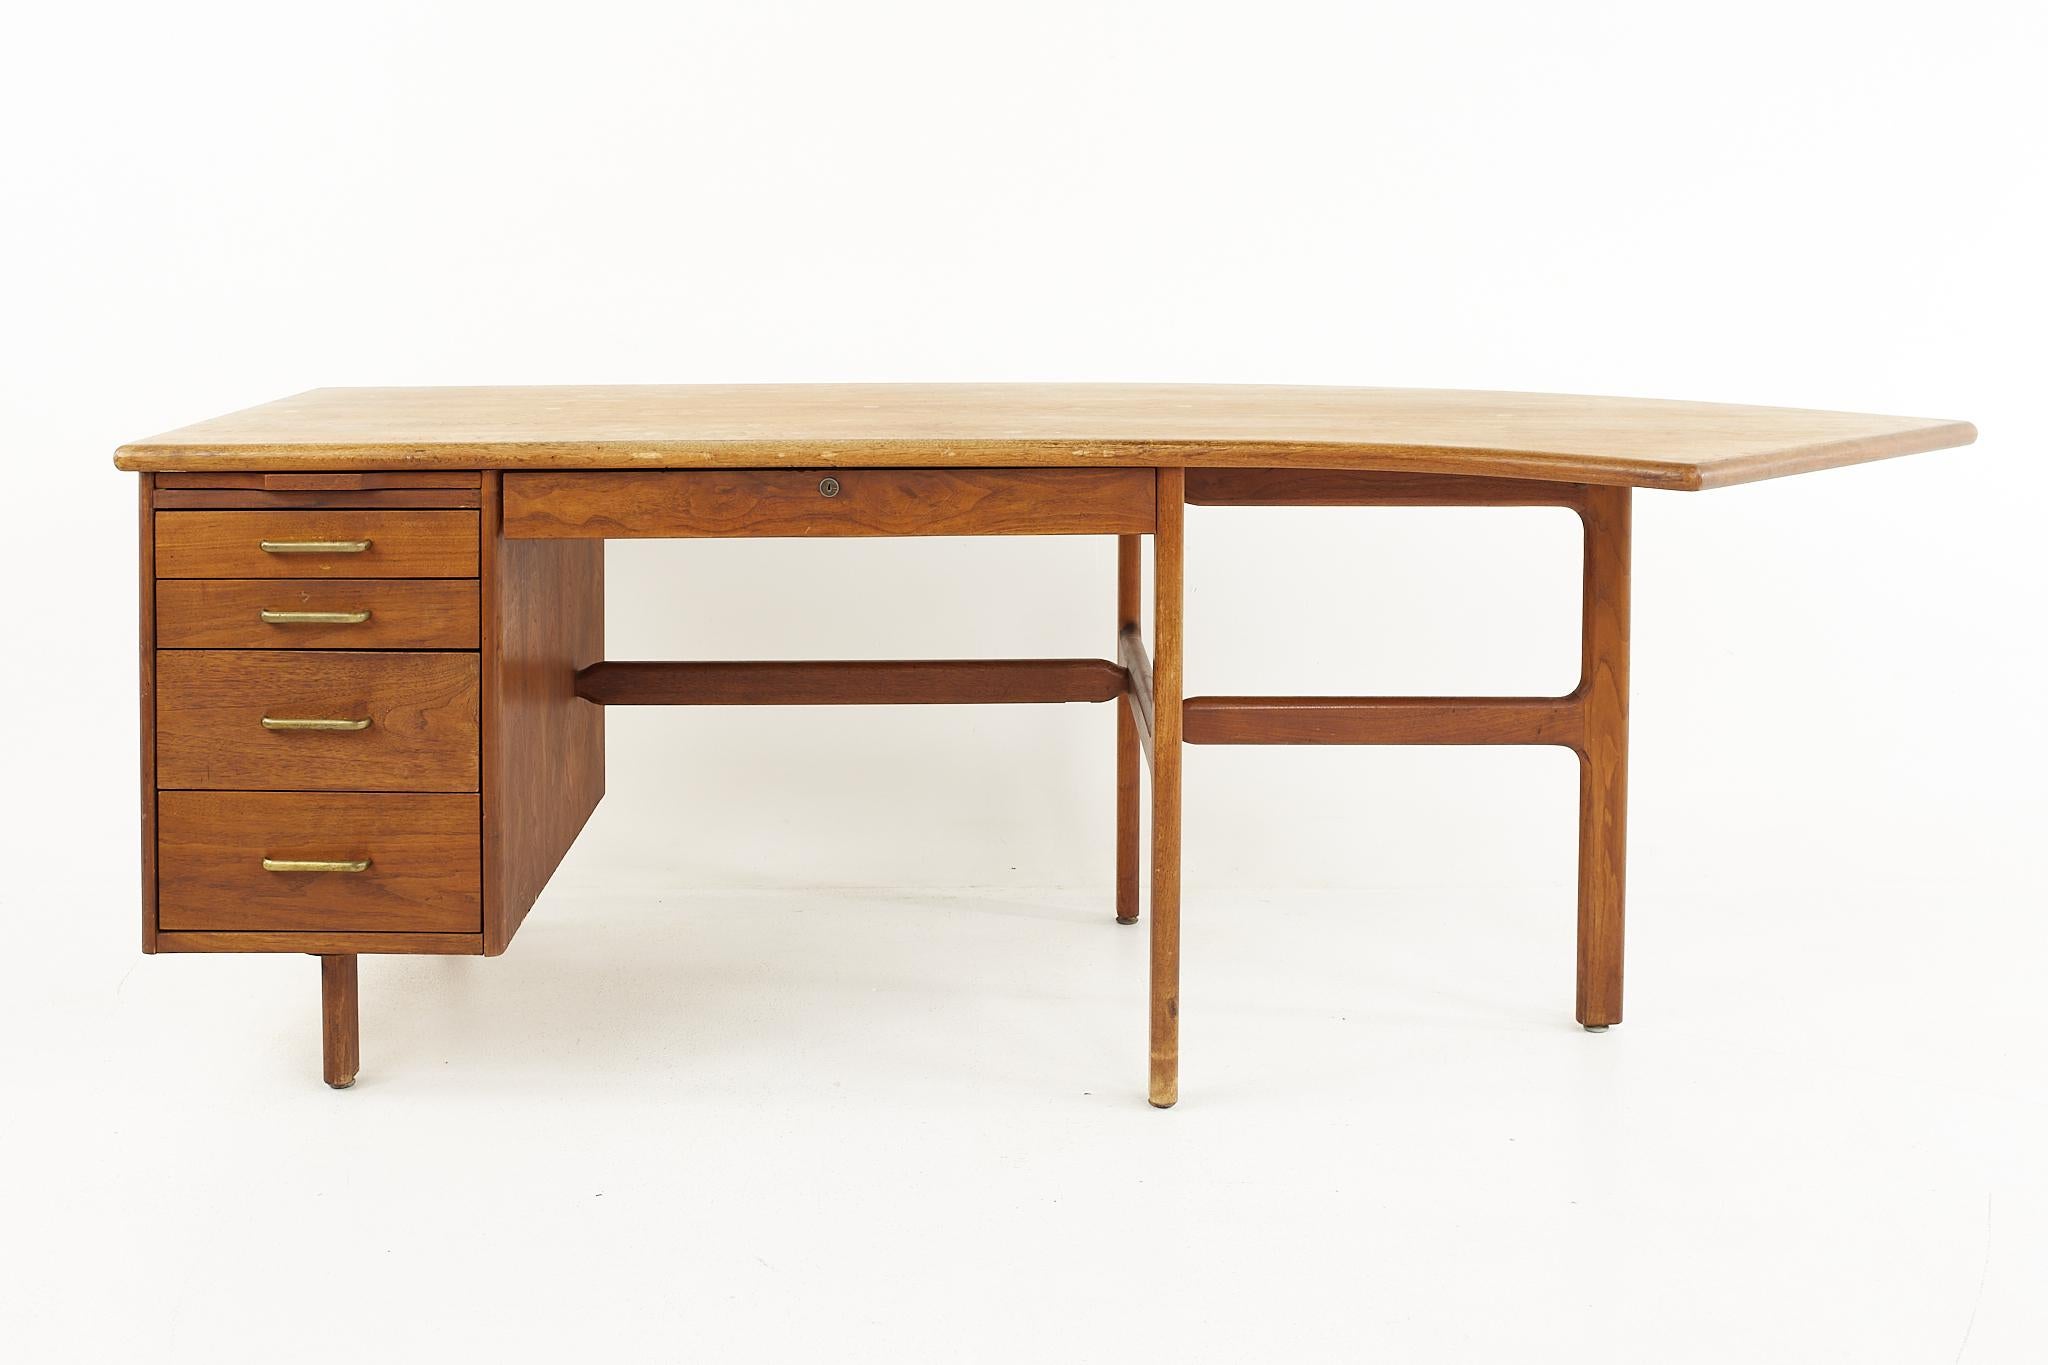 Standard Furniture mid century walnut boomerang desk

The desk measures: 84 wide x 33 deep x 29 high, with a chair clearance of 24.75 inches 

All pieces of furniture can be had in what we call restored vintage condition. That means the piece is